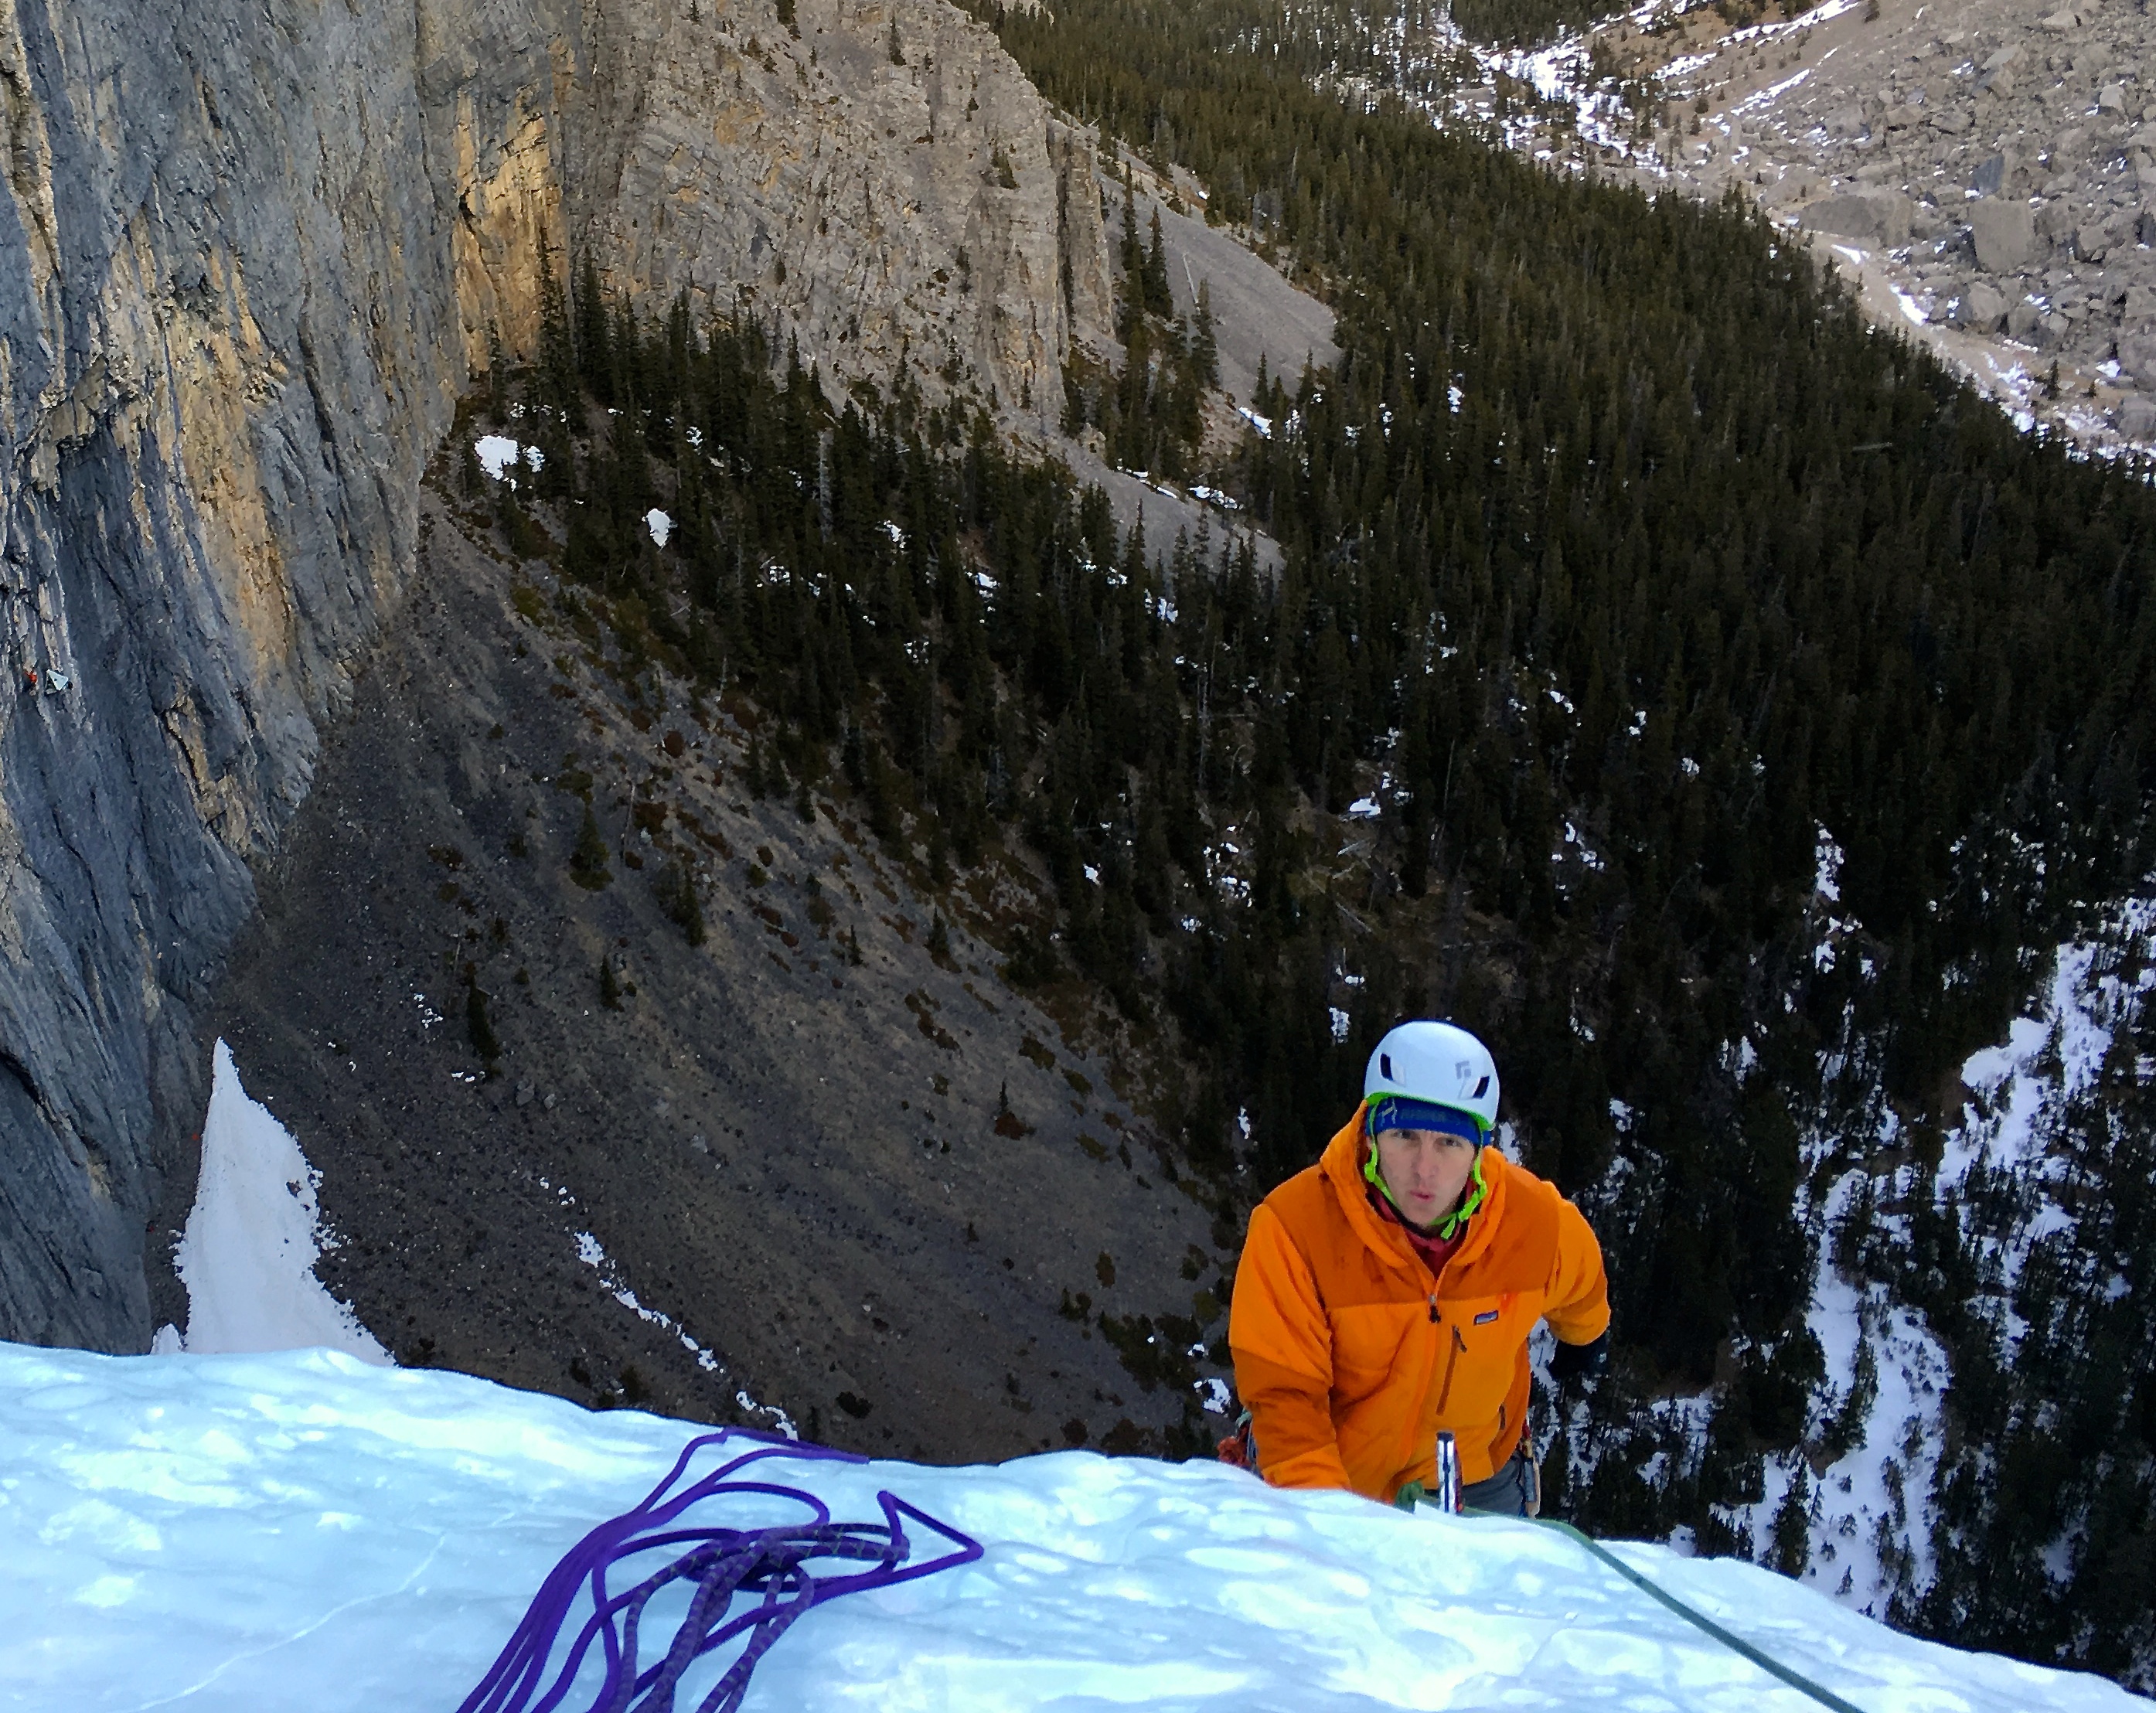 Aaron Richards giving it some corn on the last pitch of Hydrophobia N. Ghost AB